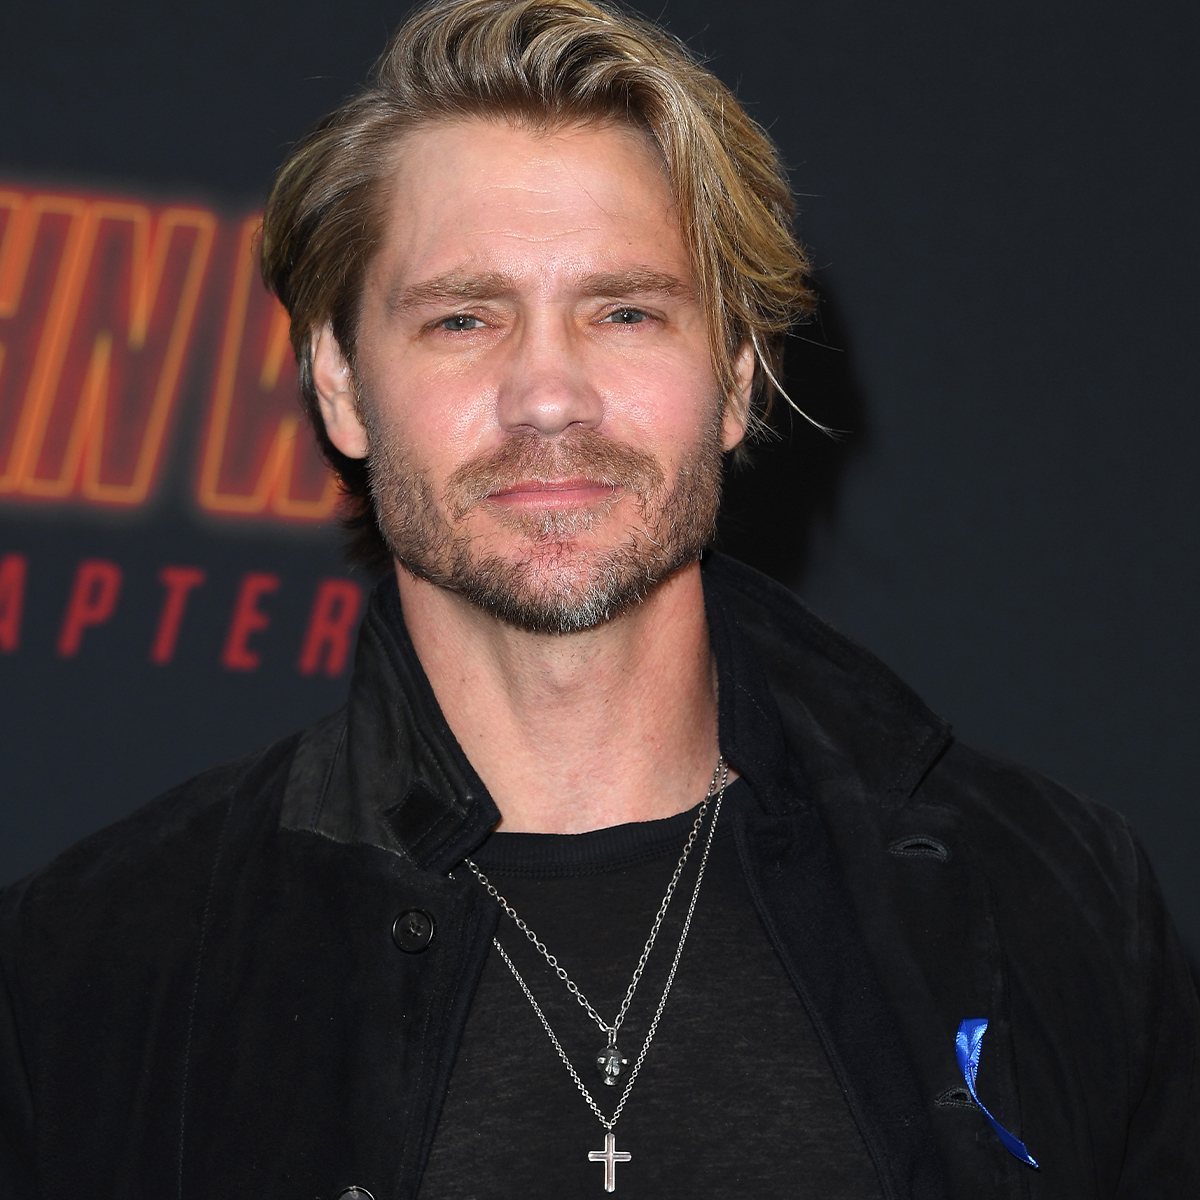 Chad Michael Murray’s Wife Sarah Roemer Is Pregnant With Baby No. 3